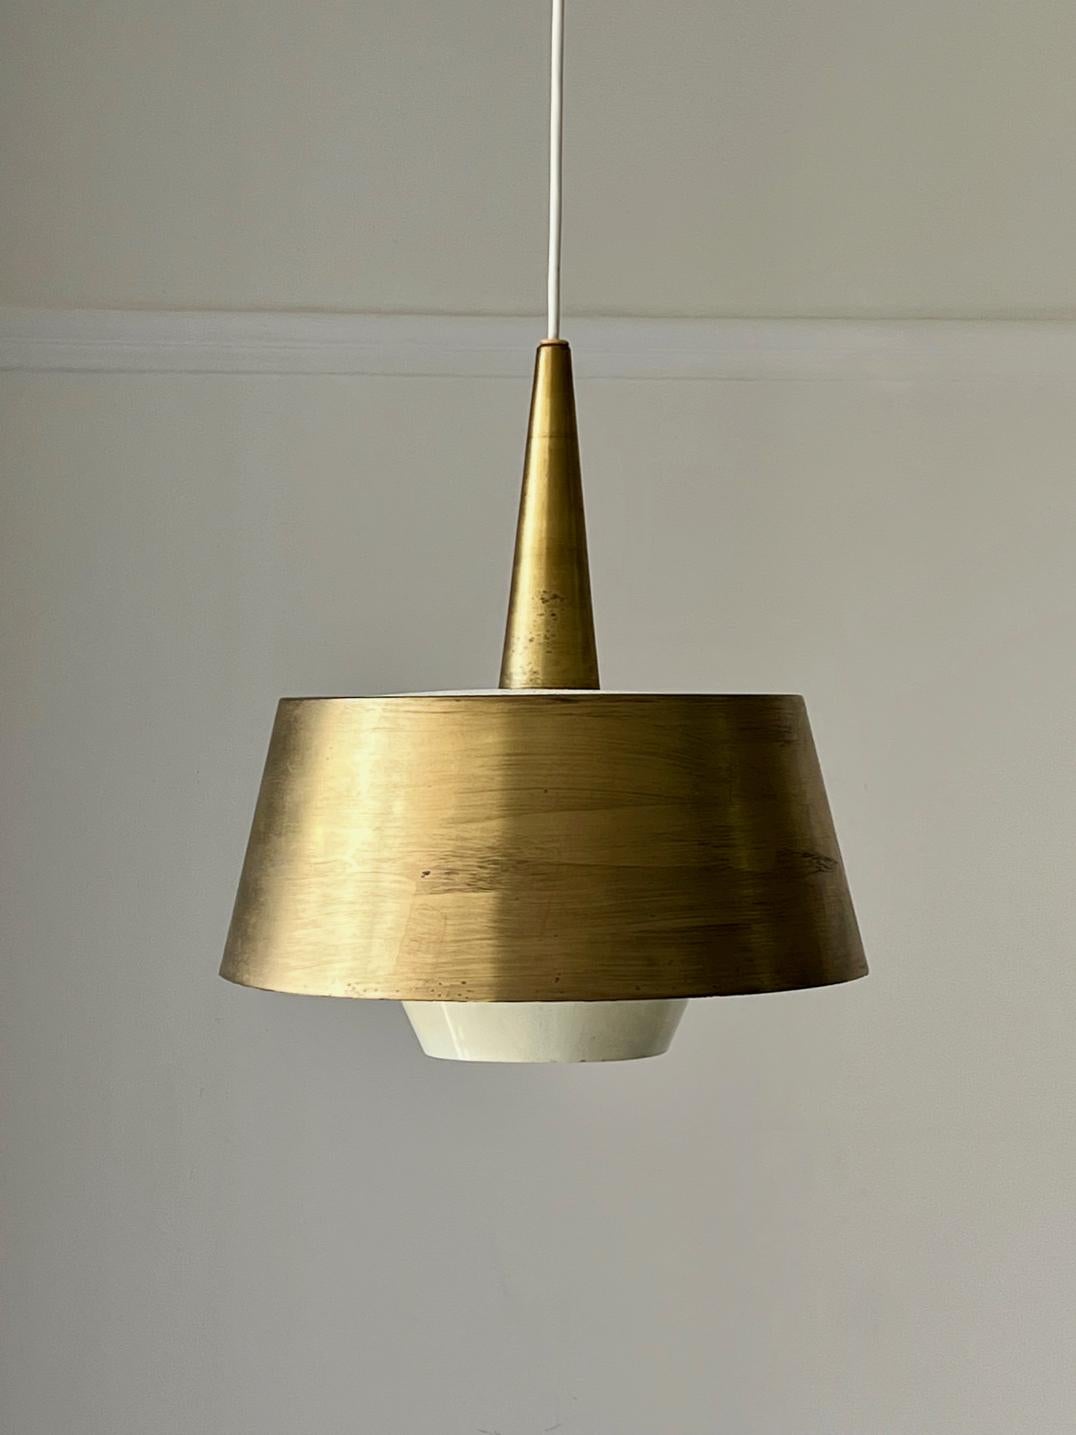 Mid-20th century pendant light made by G Holmans of Helsinki, Finland.

Simple elegant pendant light in brass and lacquered metal. The outer shade - white on the inside - simply rests on the white inner frame. Stamped with the G Holman mark inside